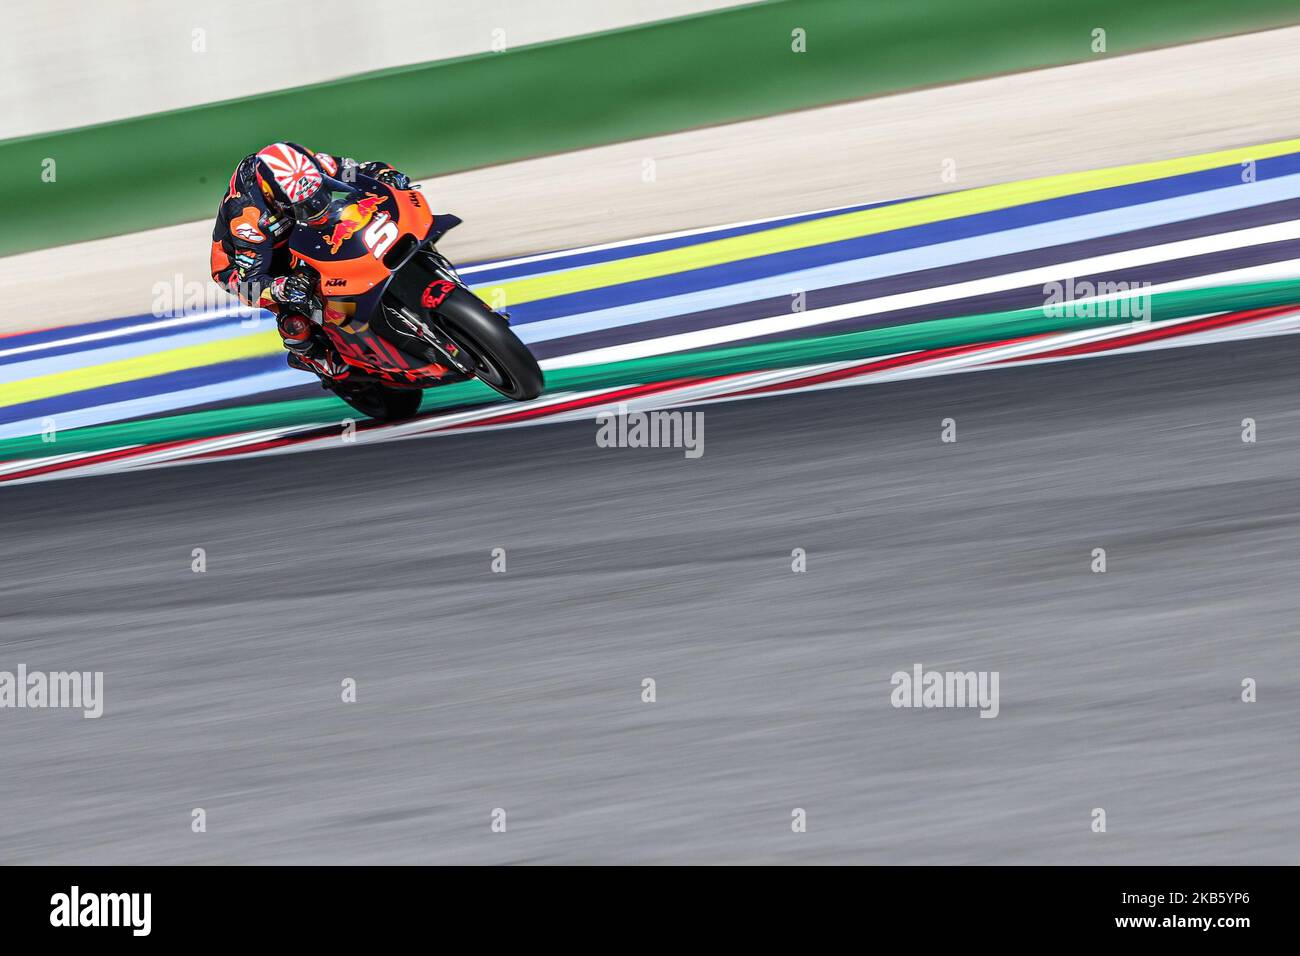 Johann Zarco of Red Bull KTM Factory Racing Team during the MotoGP of San Marino - Practice at Misano World Circuit on September 14, 2019 in Misano Adriatico, Italy. (Photo by Emmanuele Ciancaglini/NurPhoto) Stock Photo